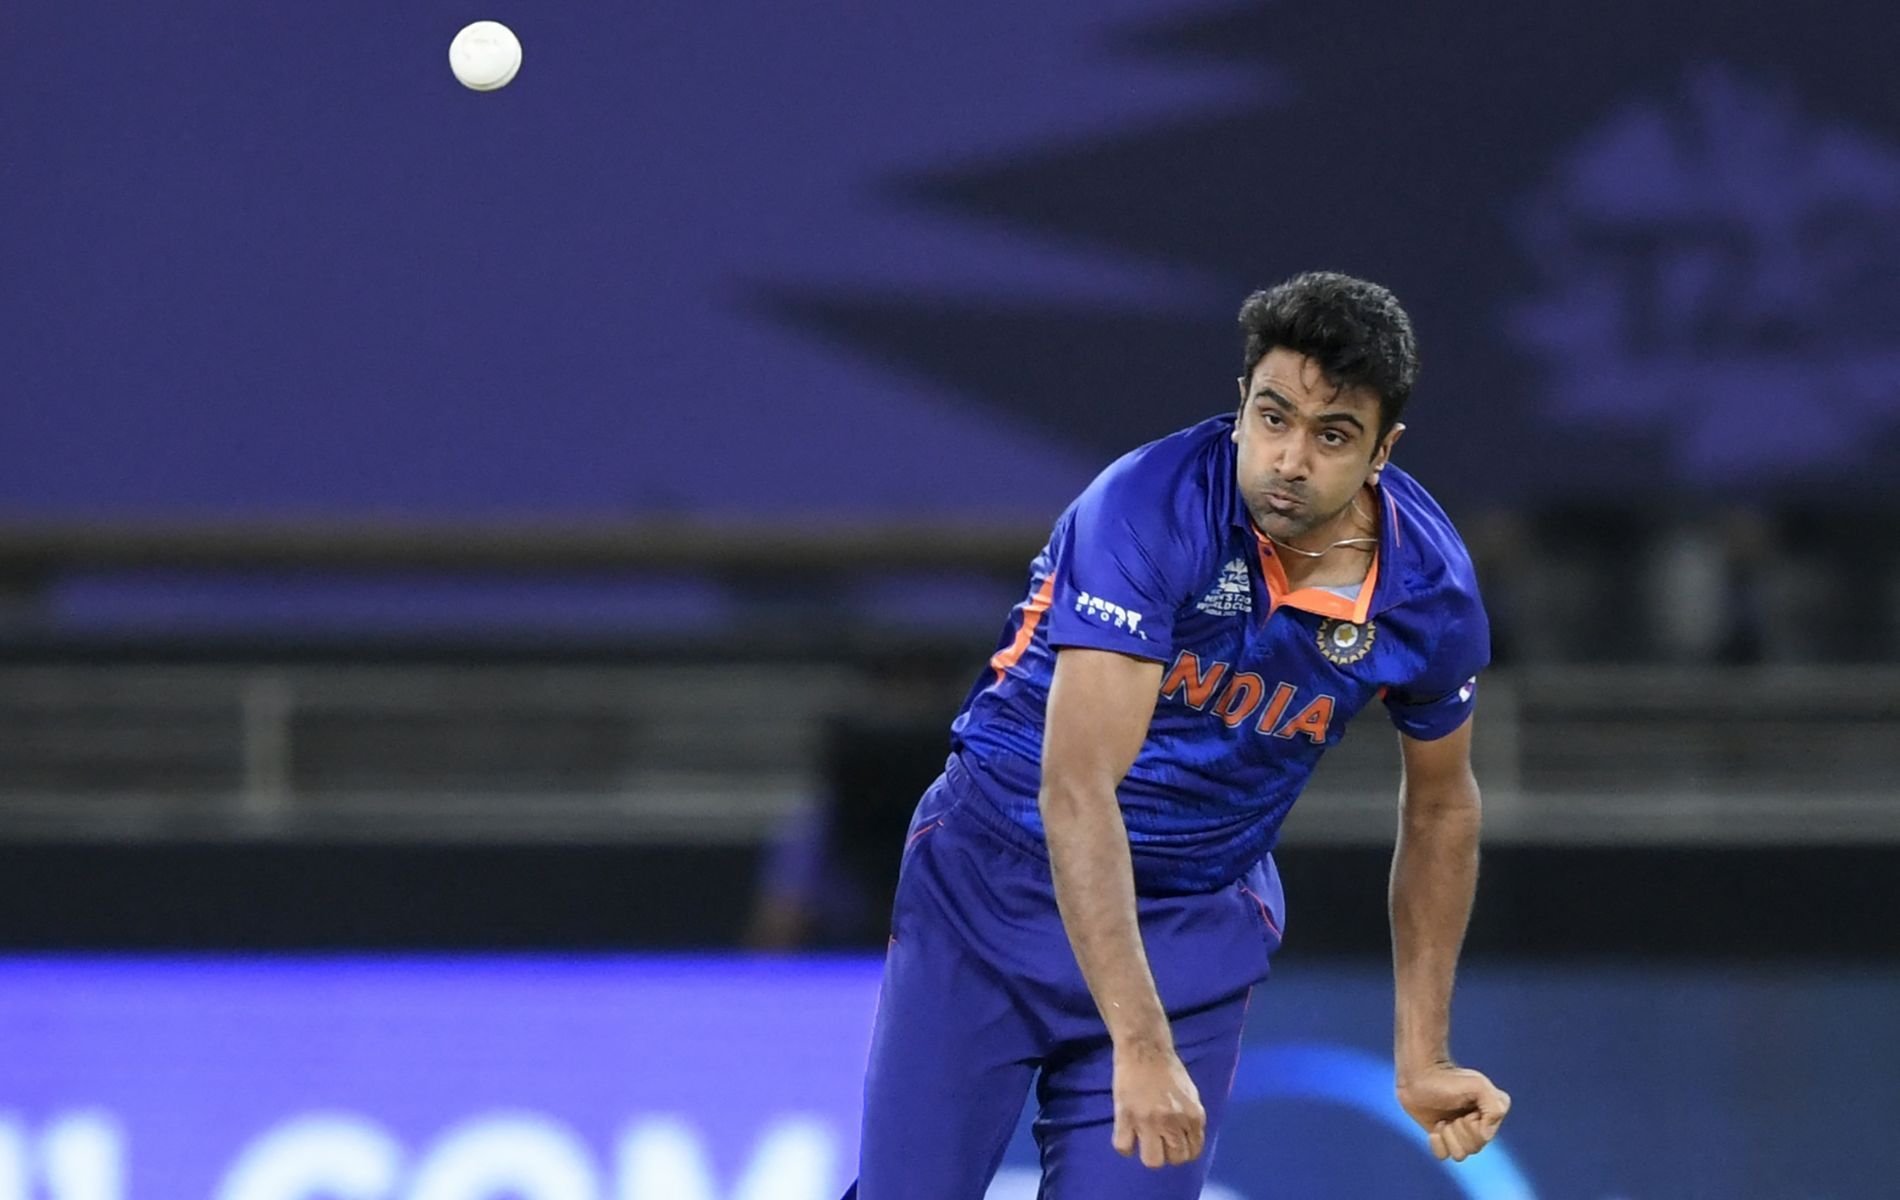 Ravichandran Ashwin has impressed in the T20I series against New Zealand.